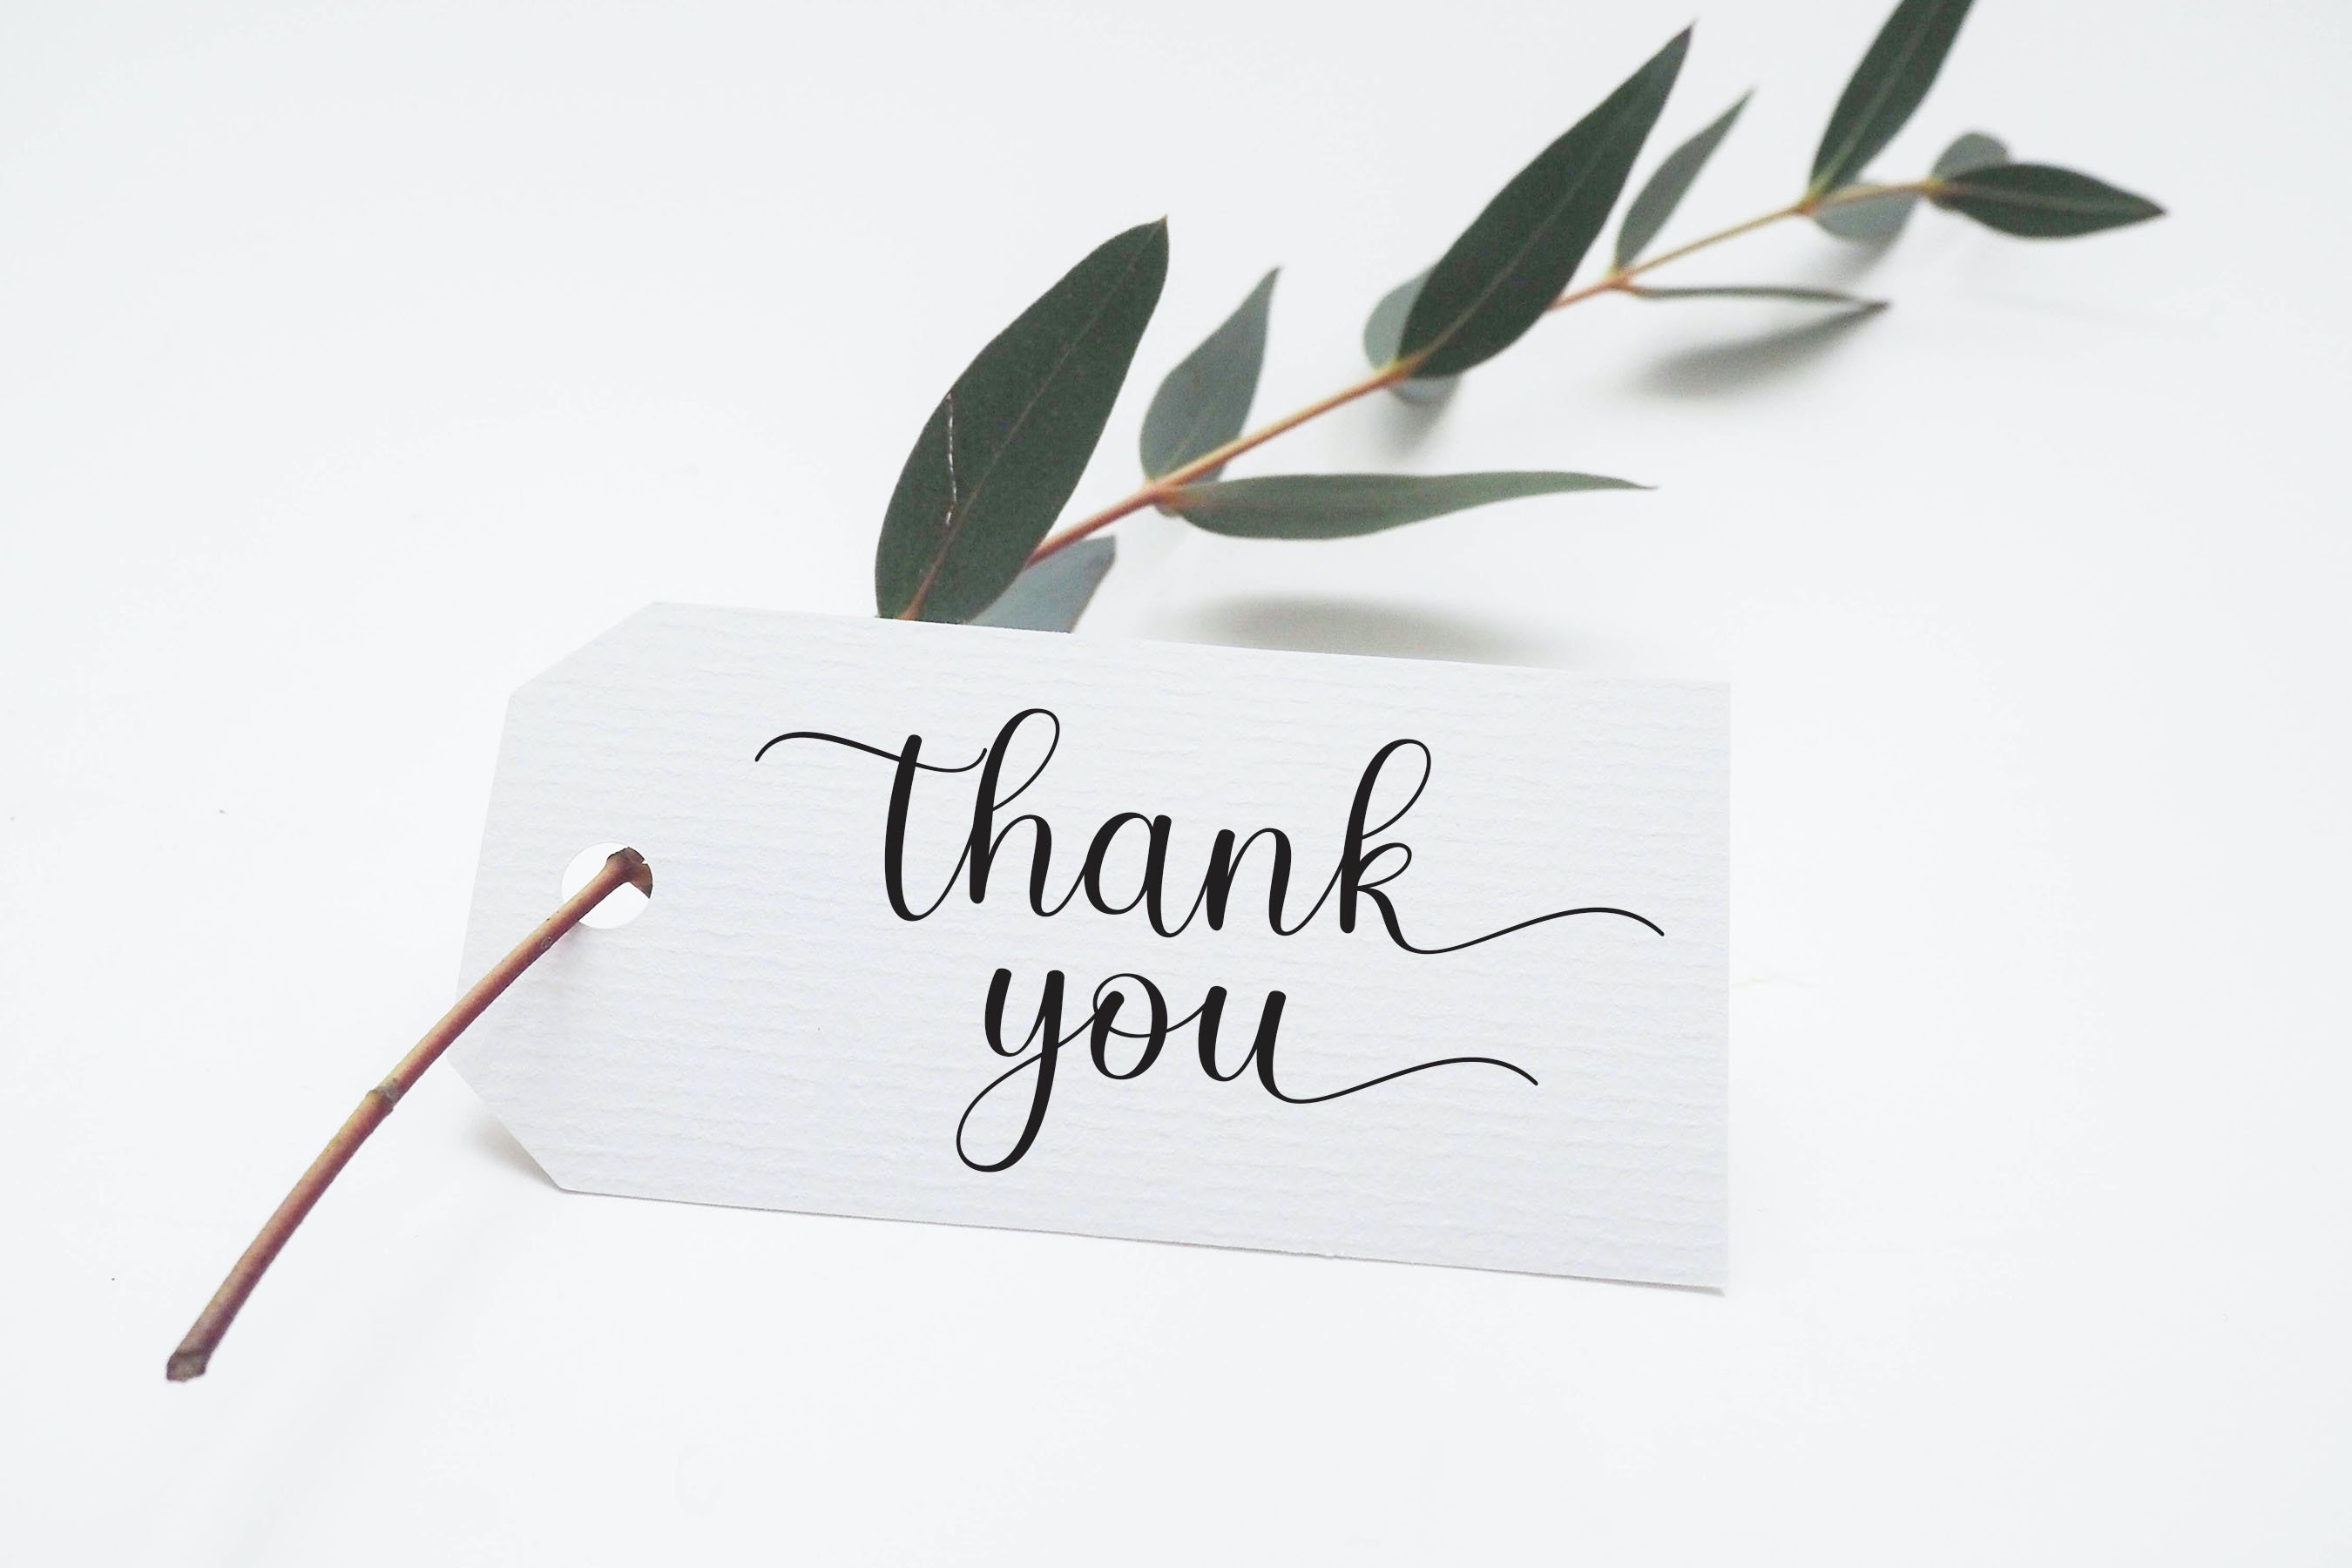 A thank card with the words thank you written on it.